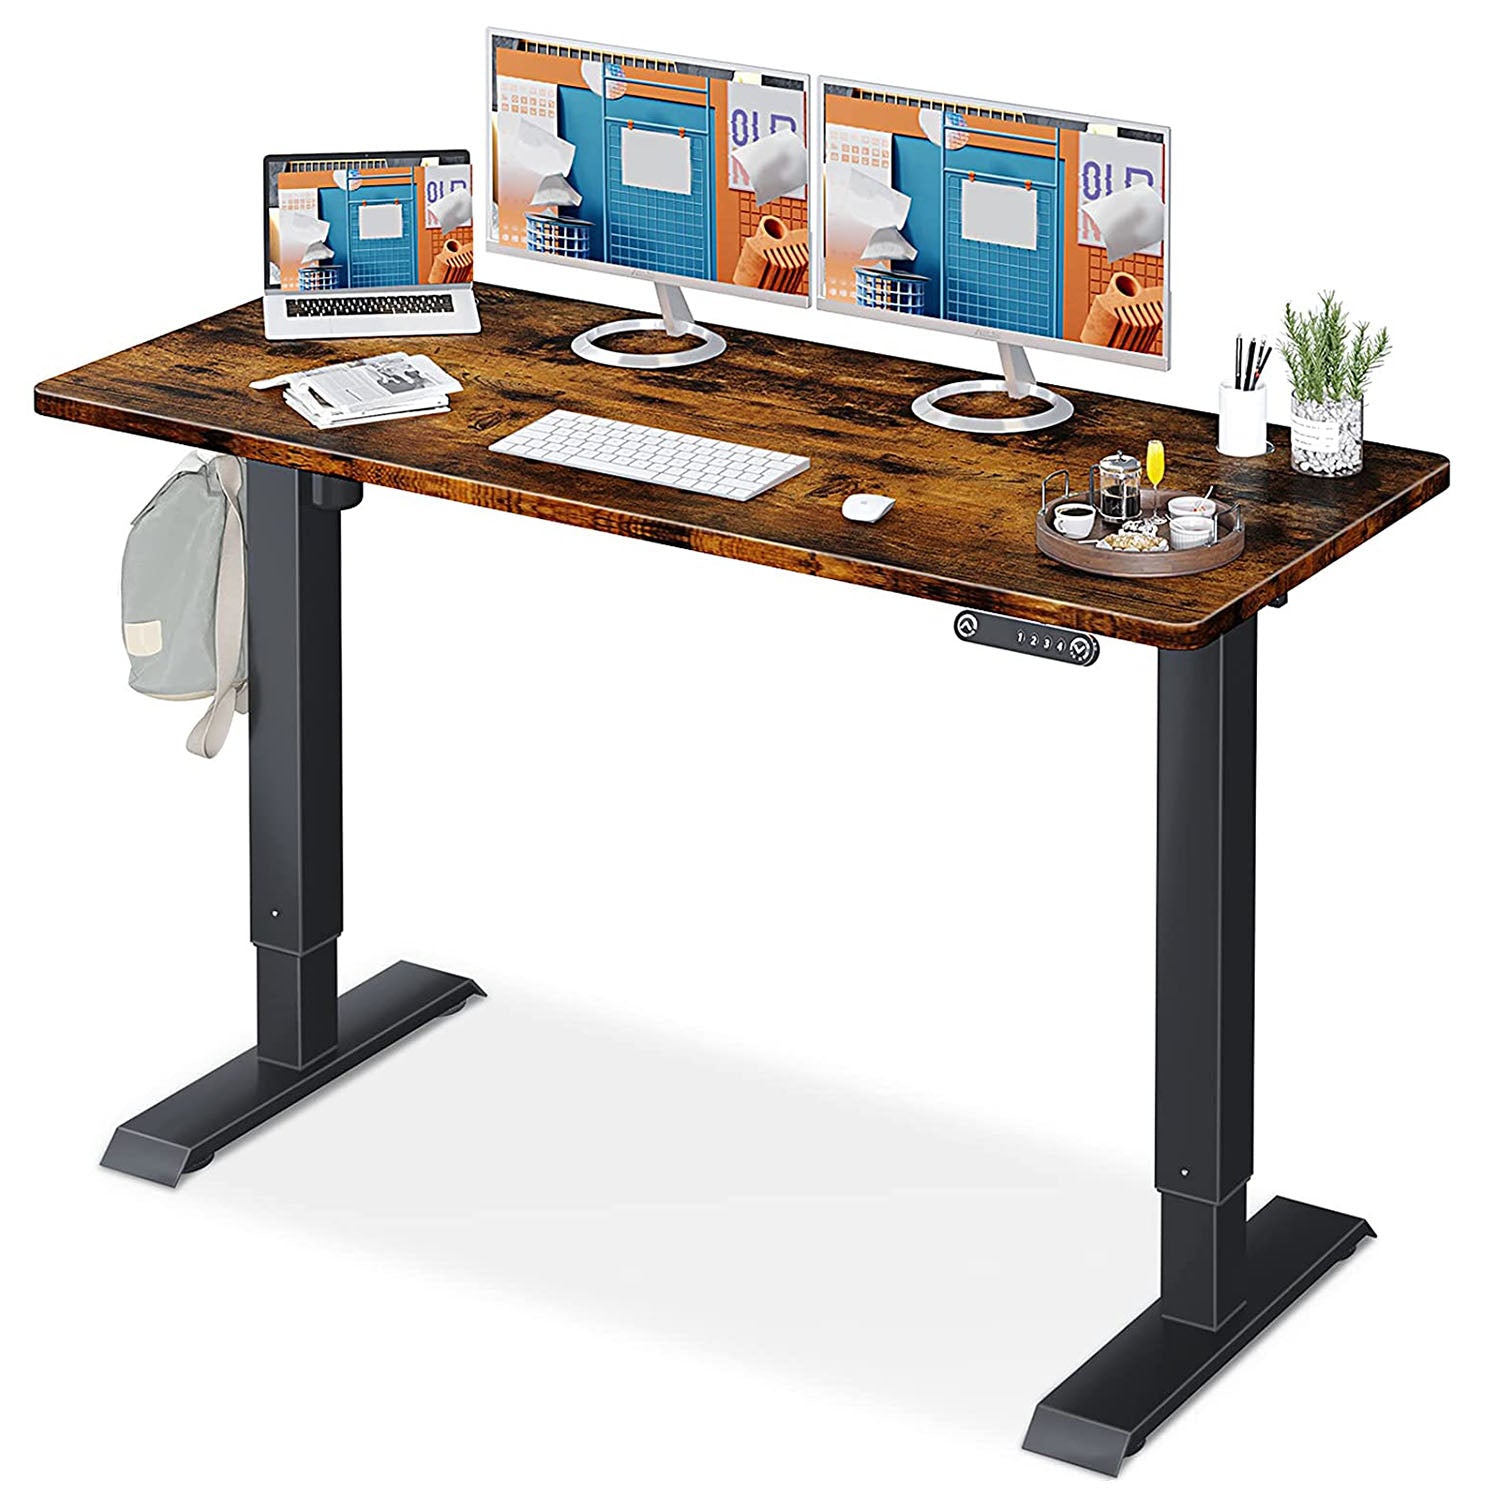 55" x 28" Electric Standing Desk with Splice Board